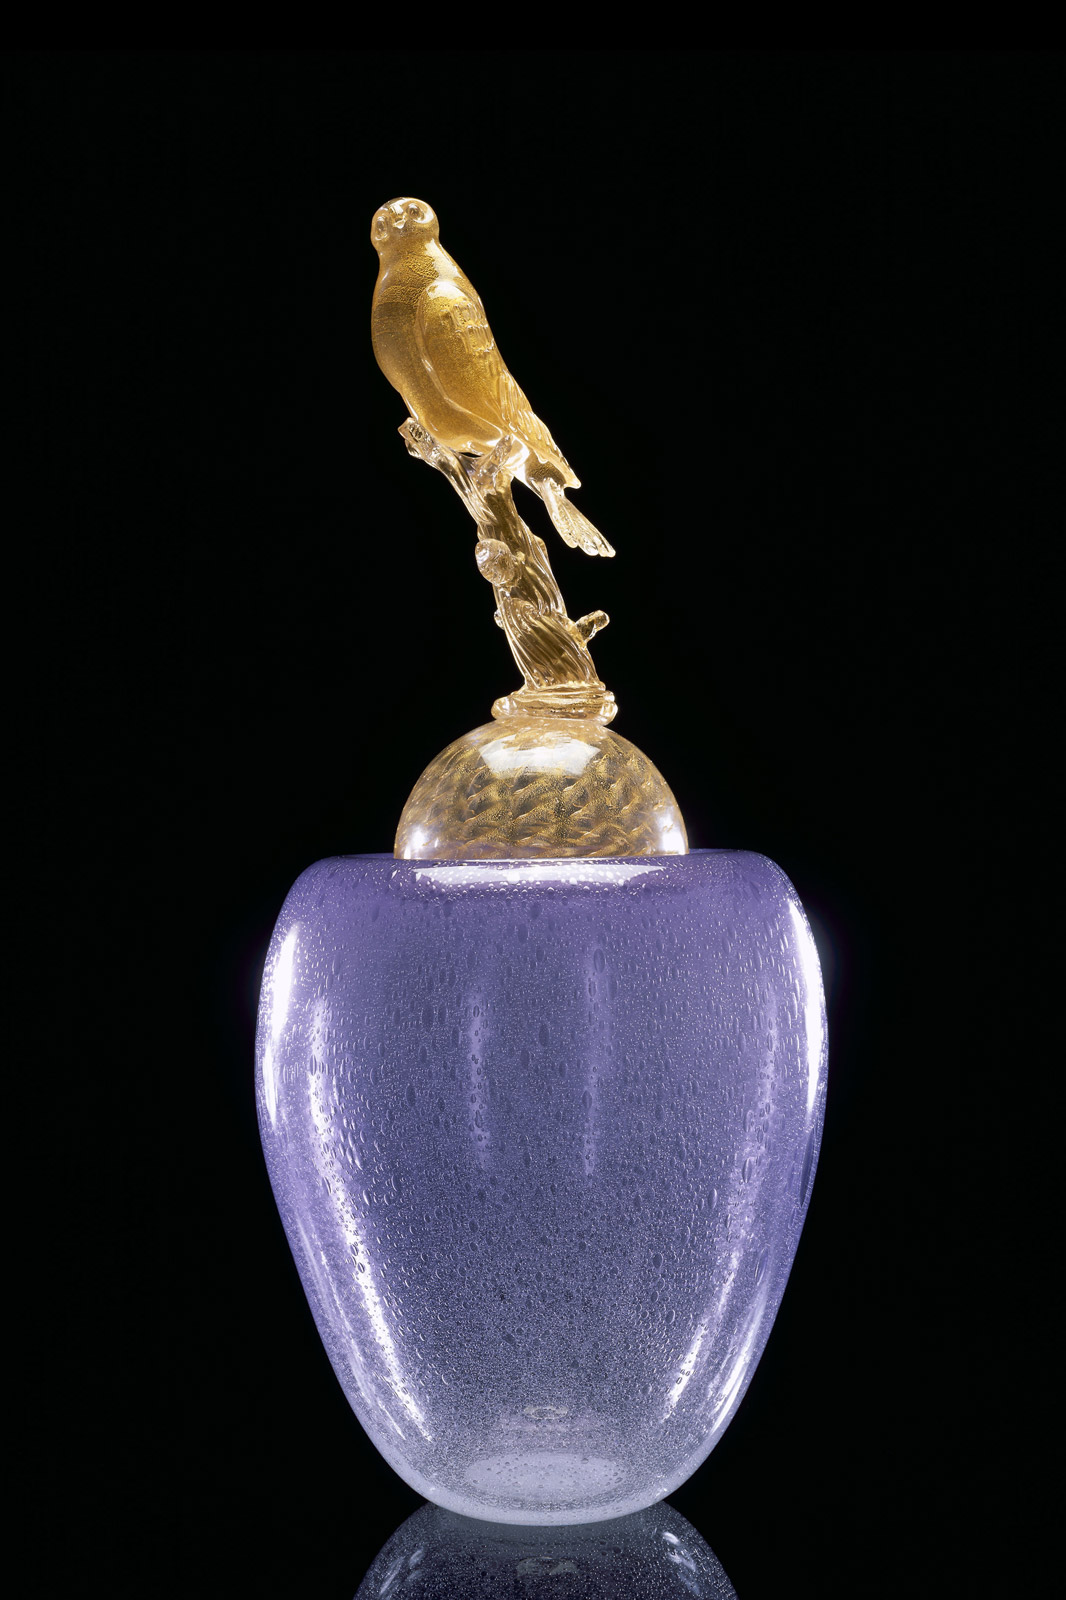 Dale Chihuly, Australian Hobby Perched on a Branch with Amethyst Base, 2000